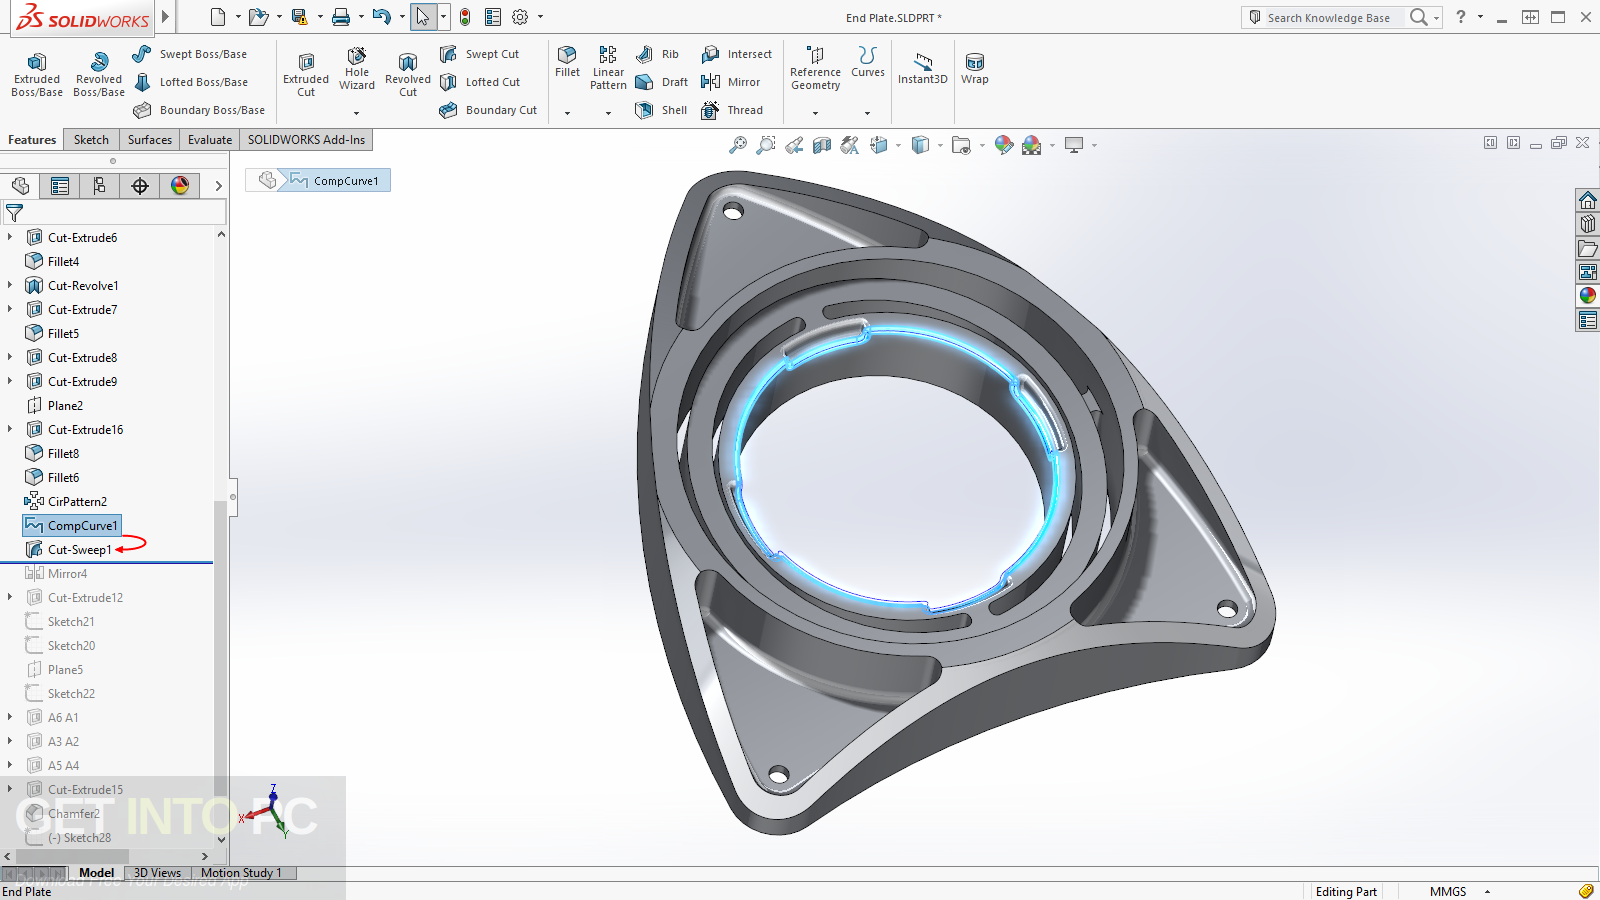 solidworks 2009 free download full version with crack 32bit